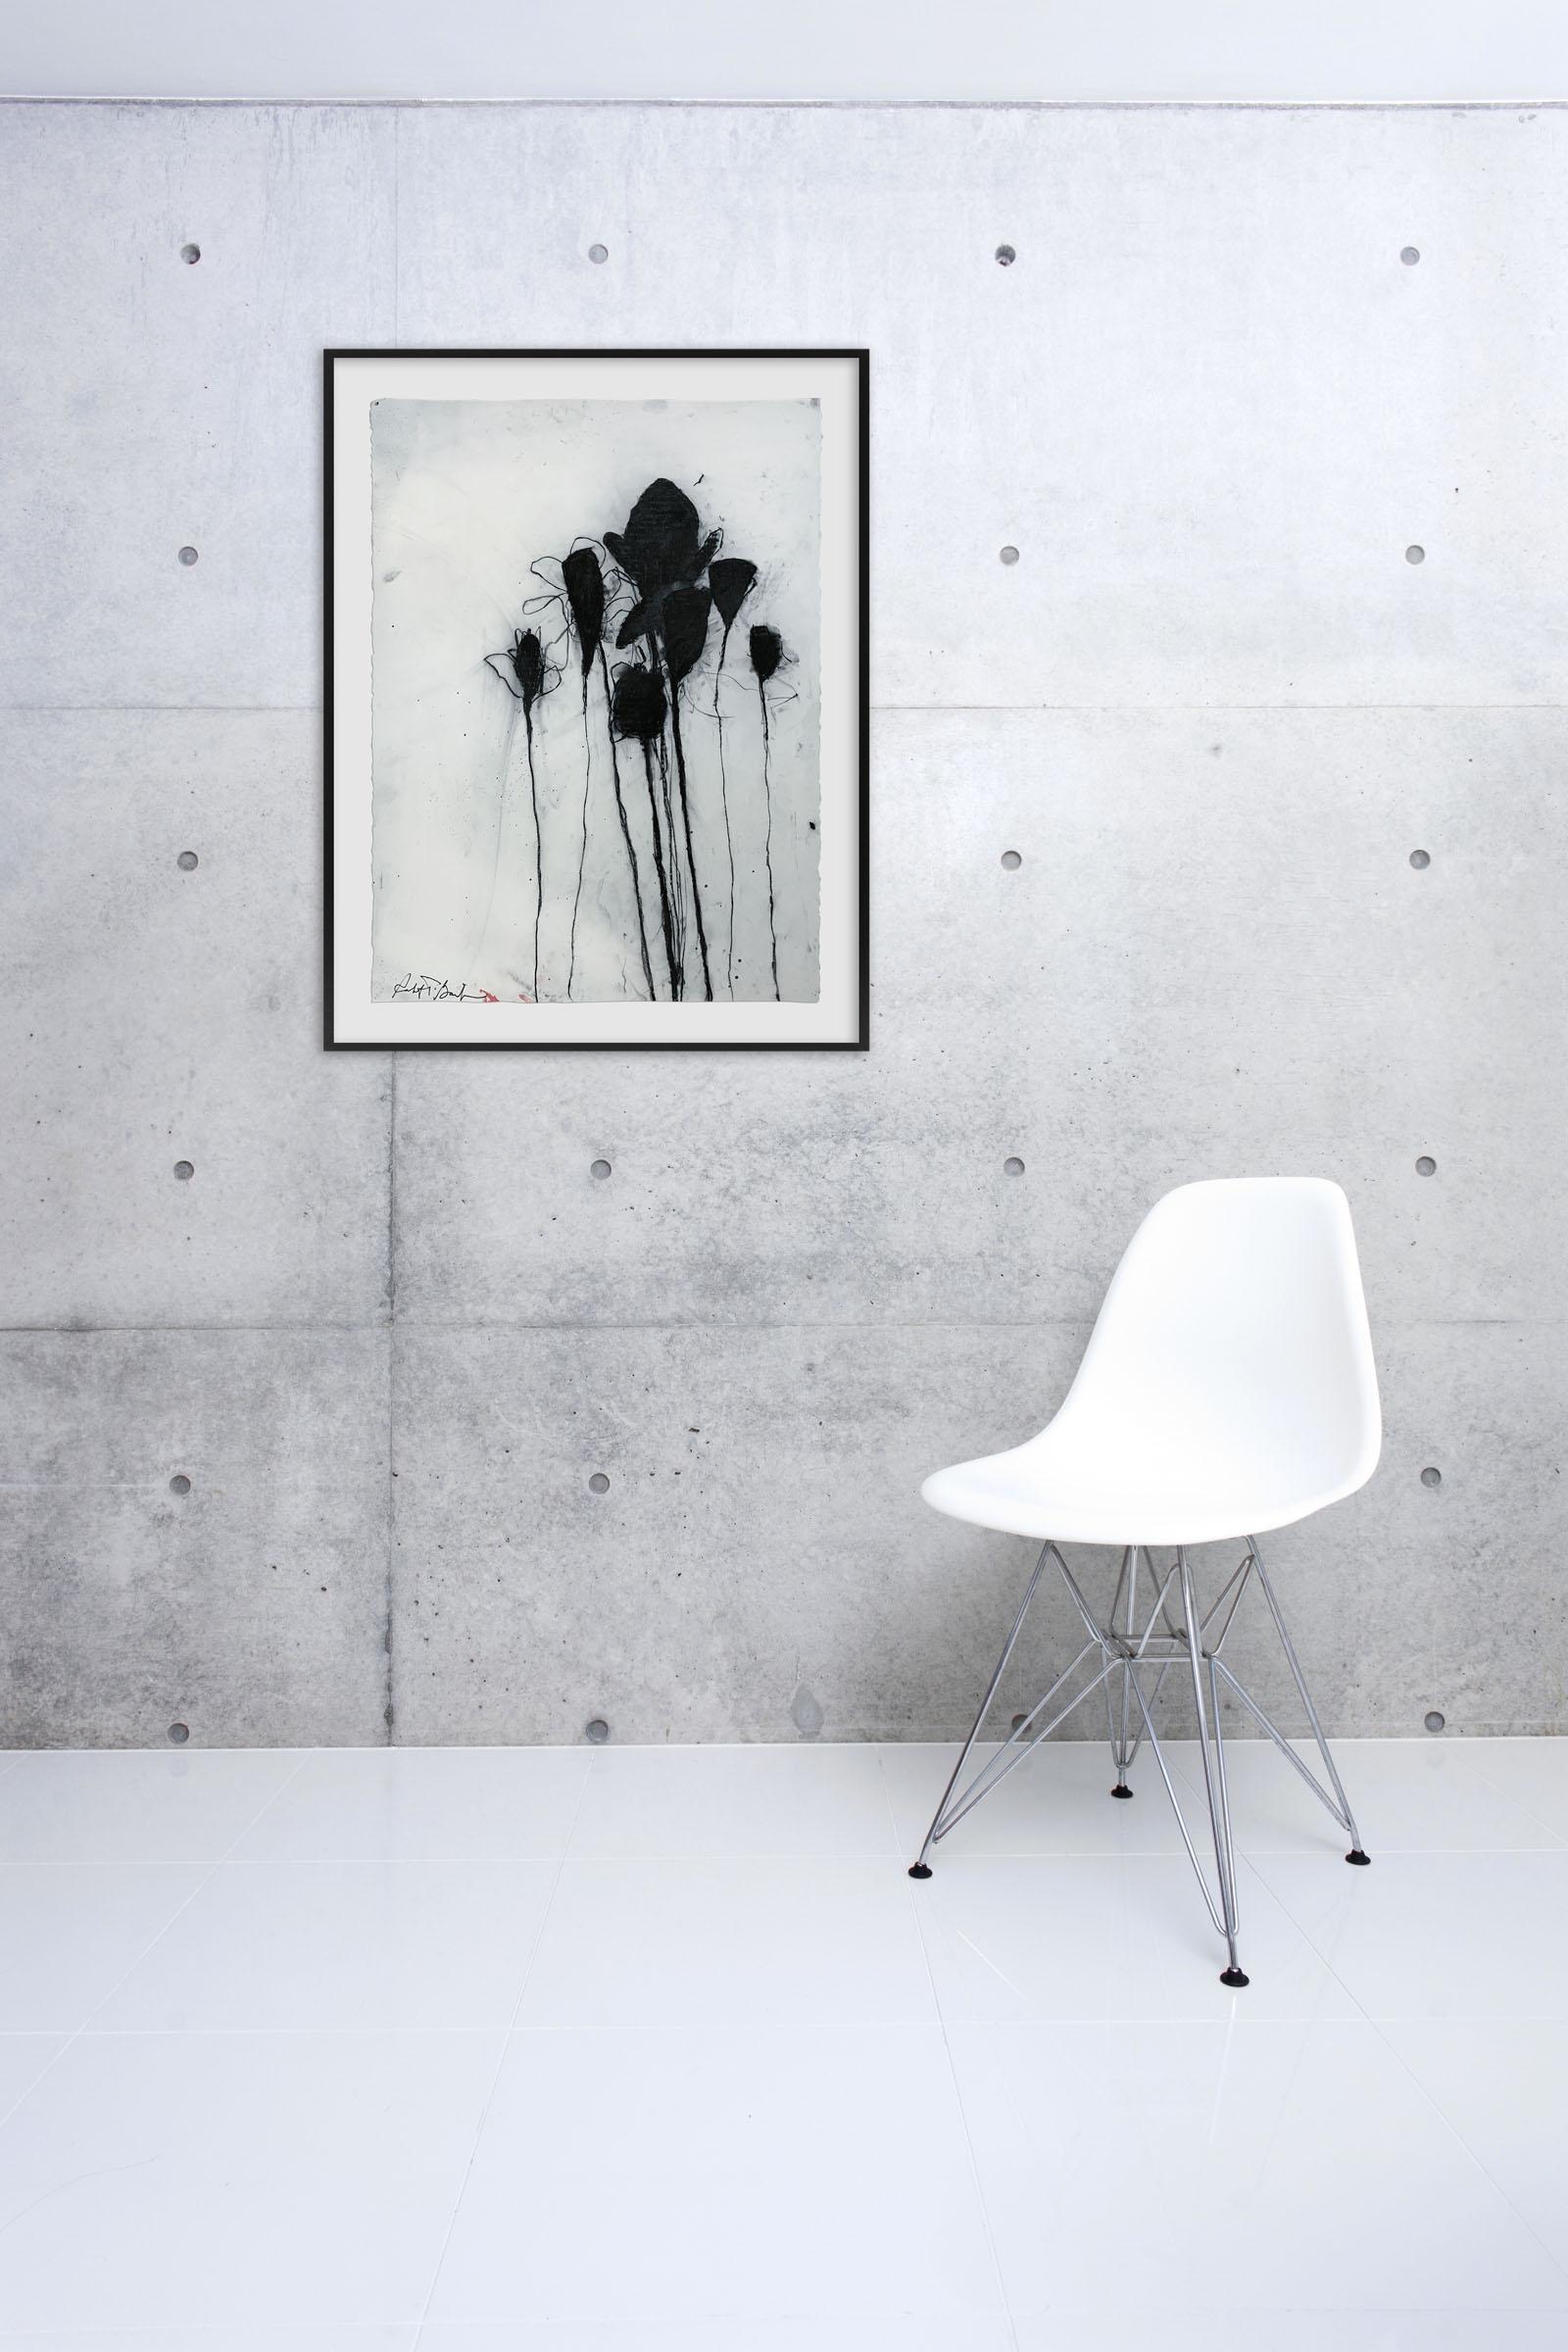 Multiple Stems in Black (Abstract painting) - Painting by Robert Baribeau